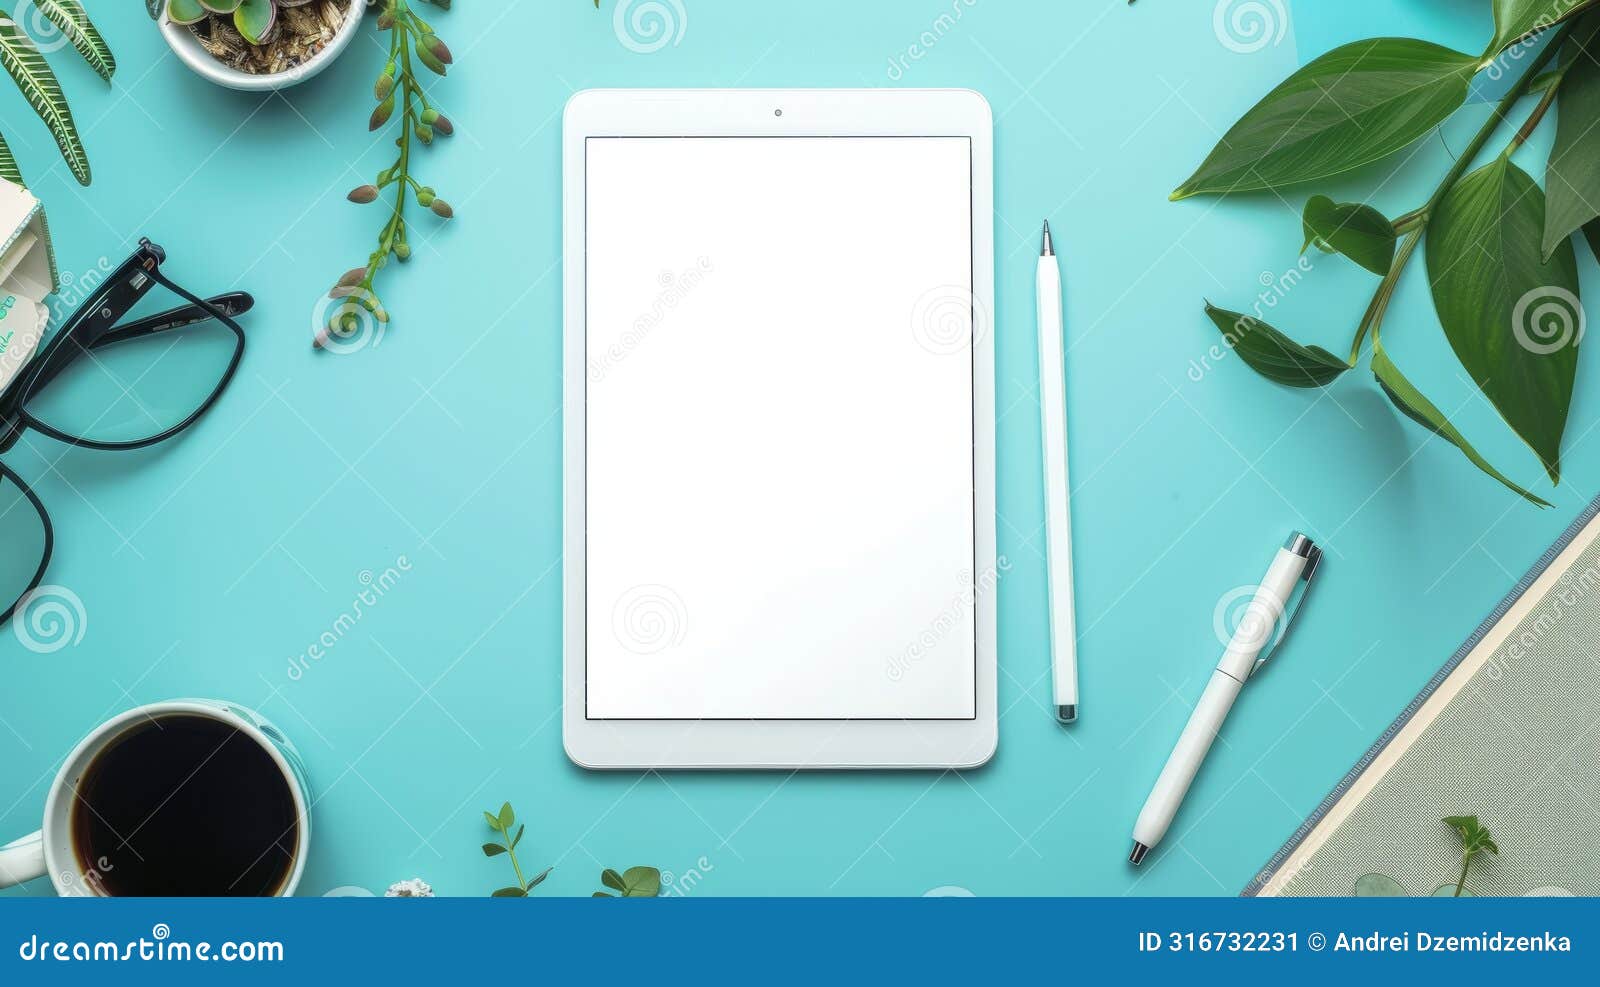 modern  of a white tablet computer with a blank screen.